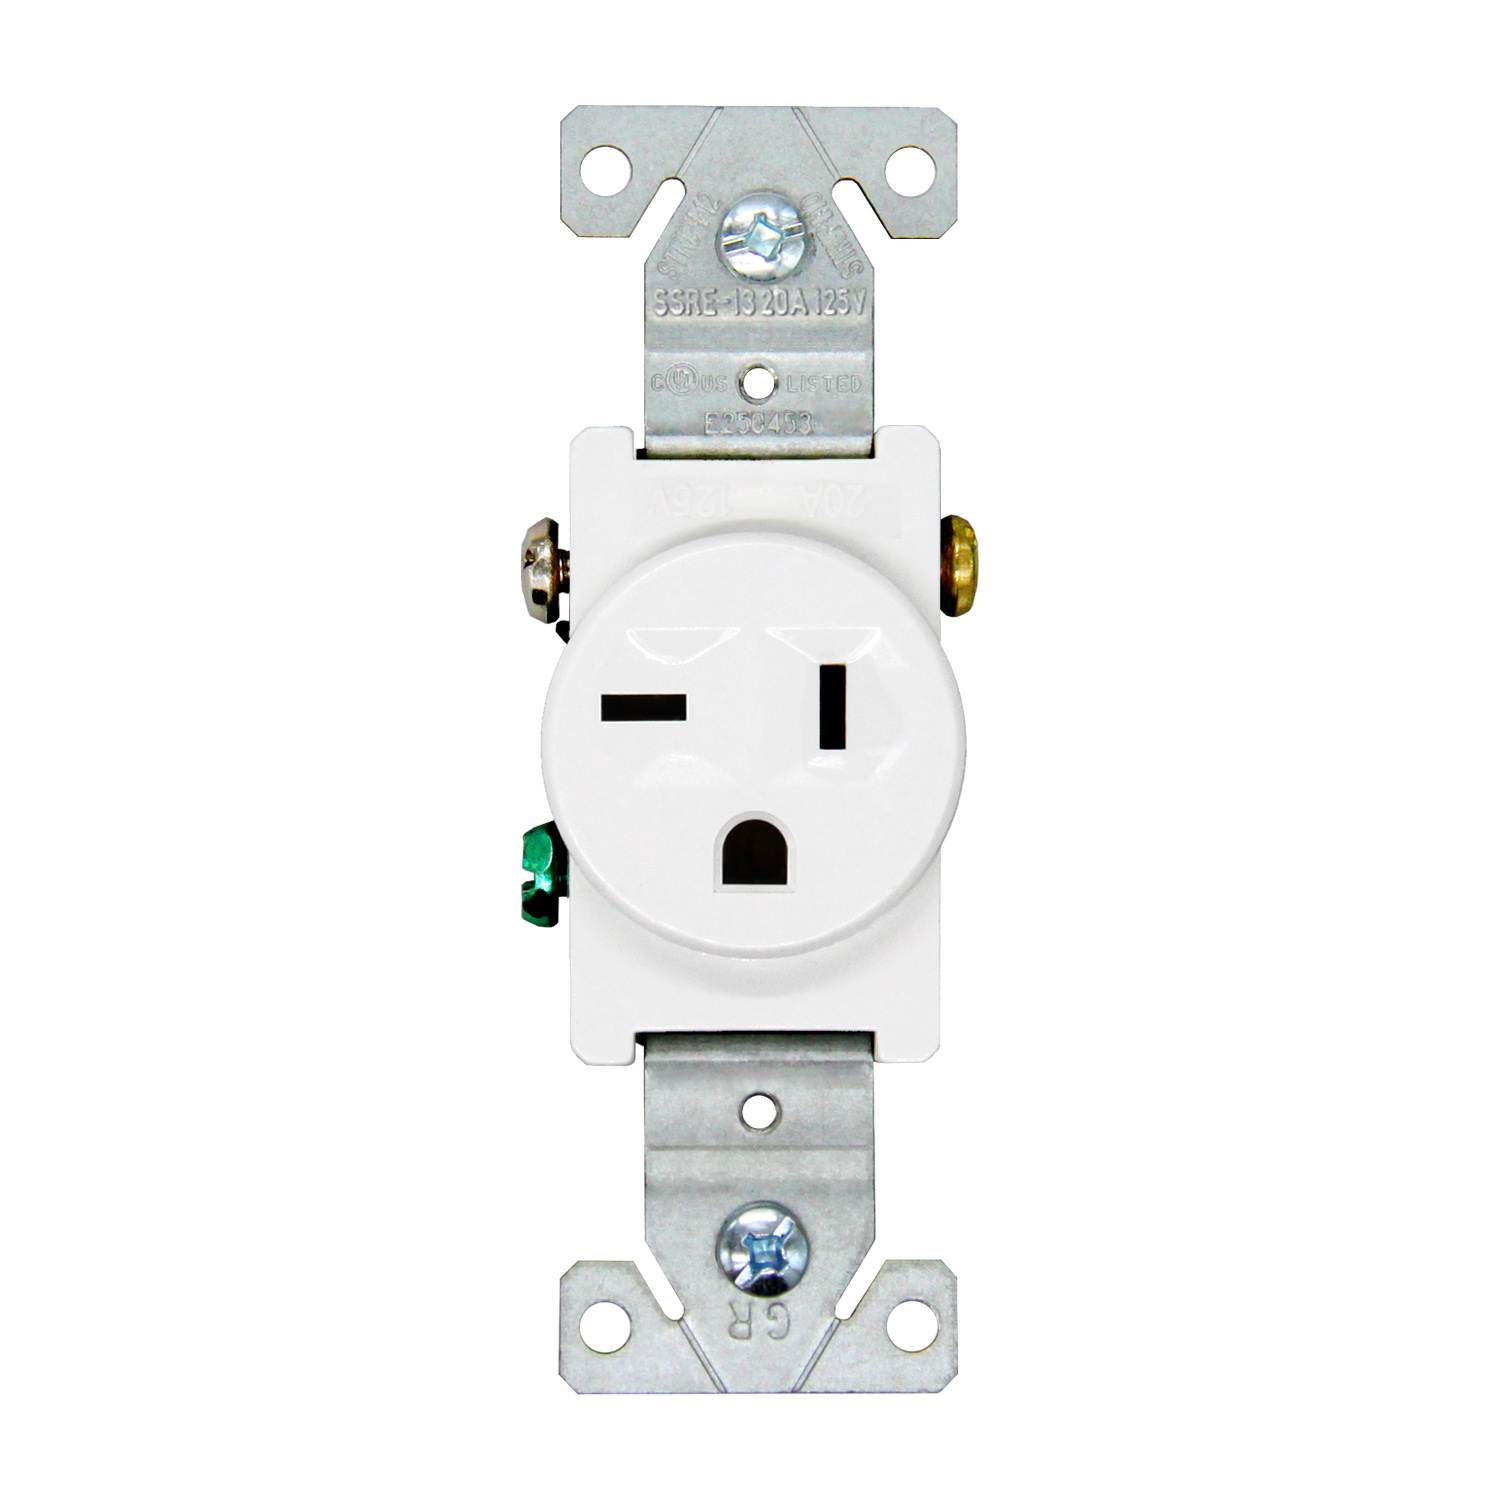 UL Listed Grounding Screw 20 Amp single Receptacle, 3-Wire, 2-Pole, 5-20R, SSRE-13 Featured Image